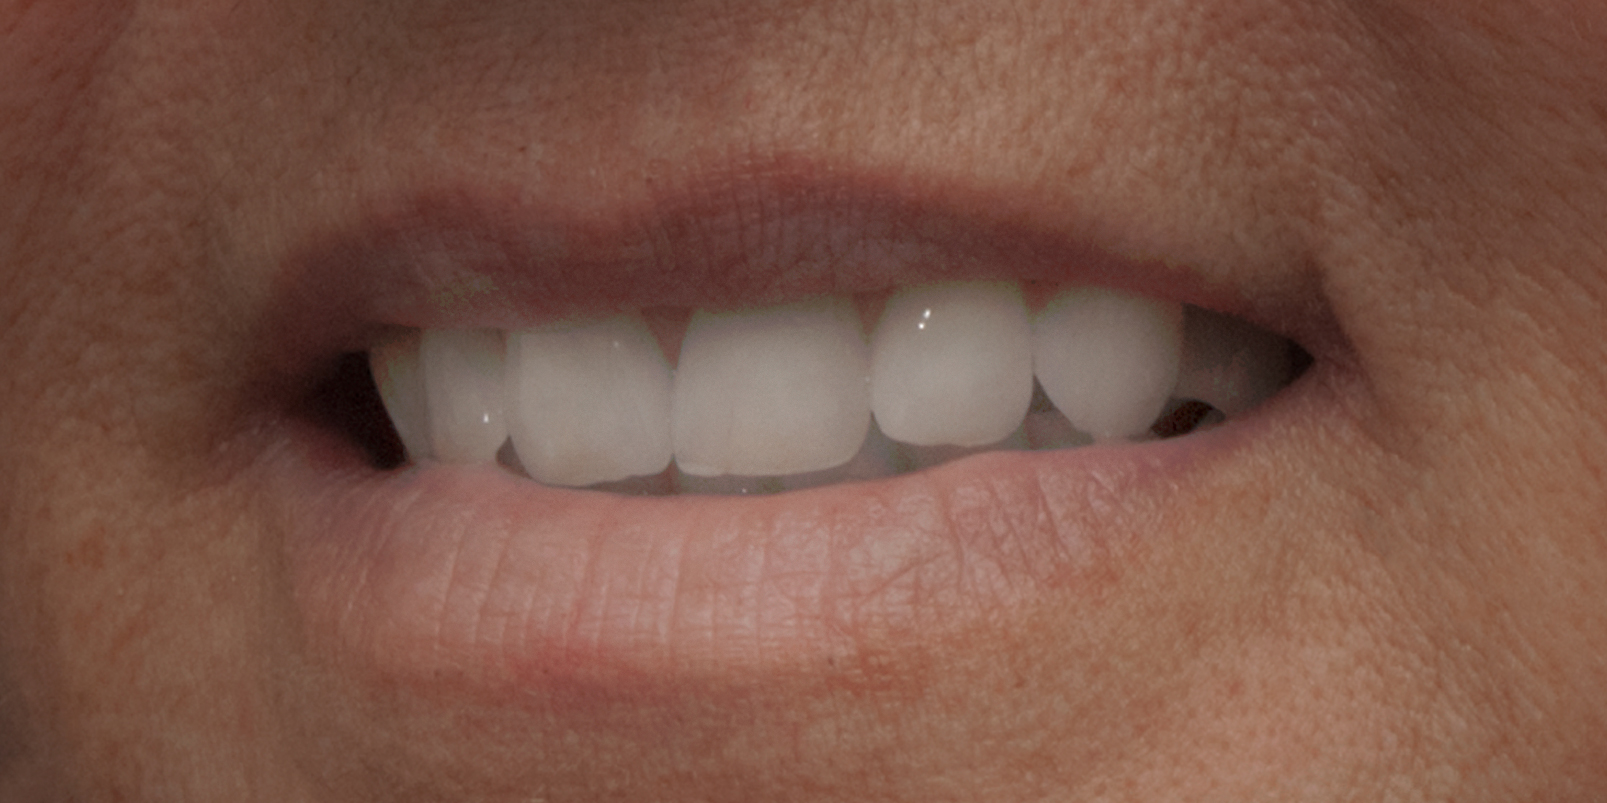 Rosa-RCW3446-Her-Denture-in-Close-Up.jpg